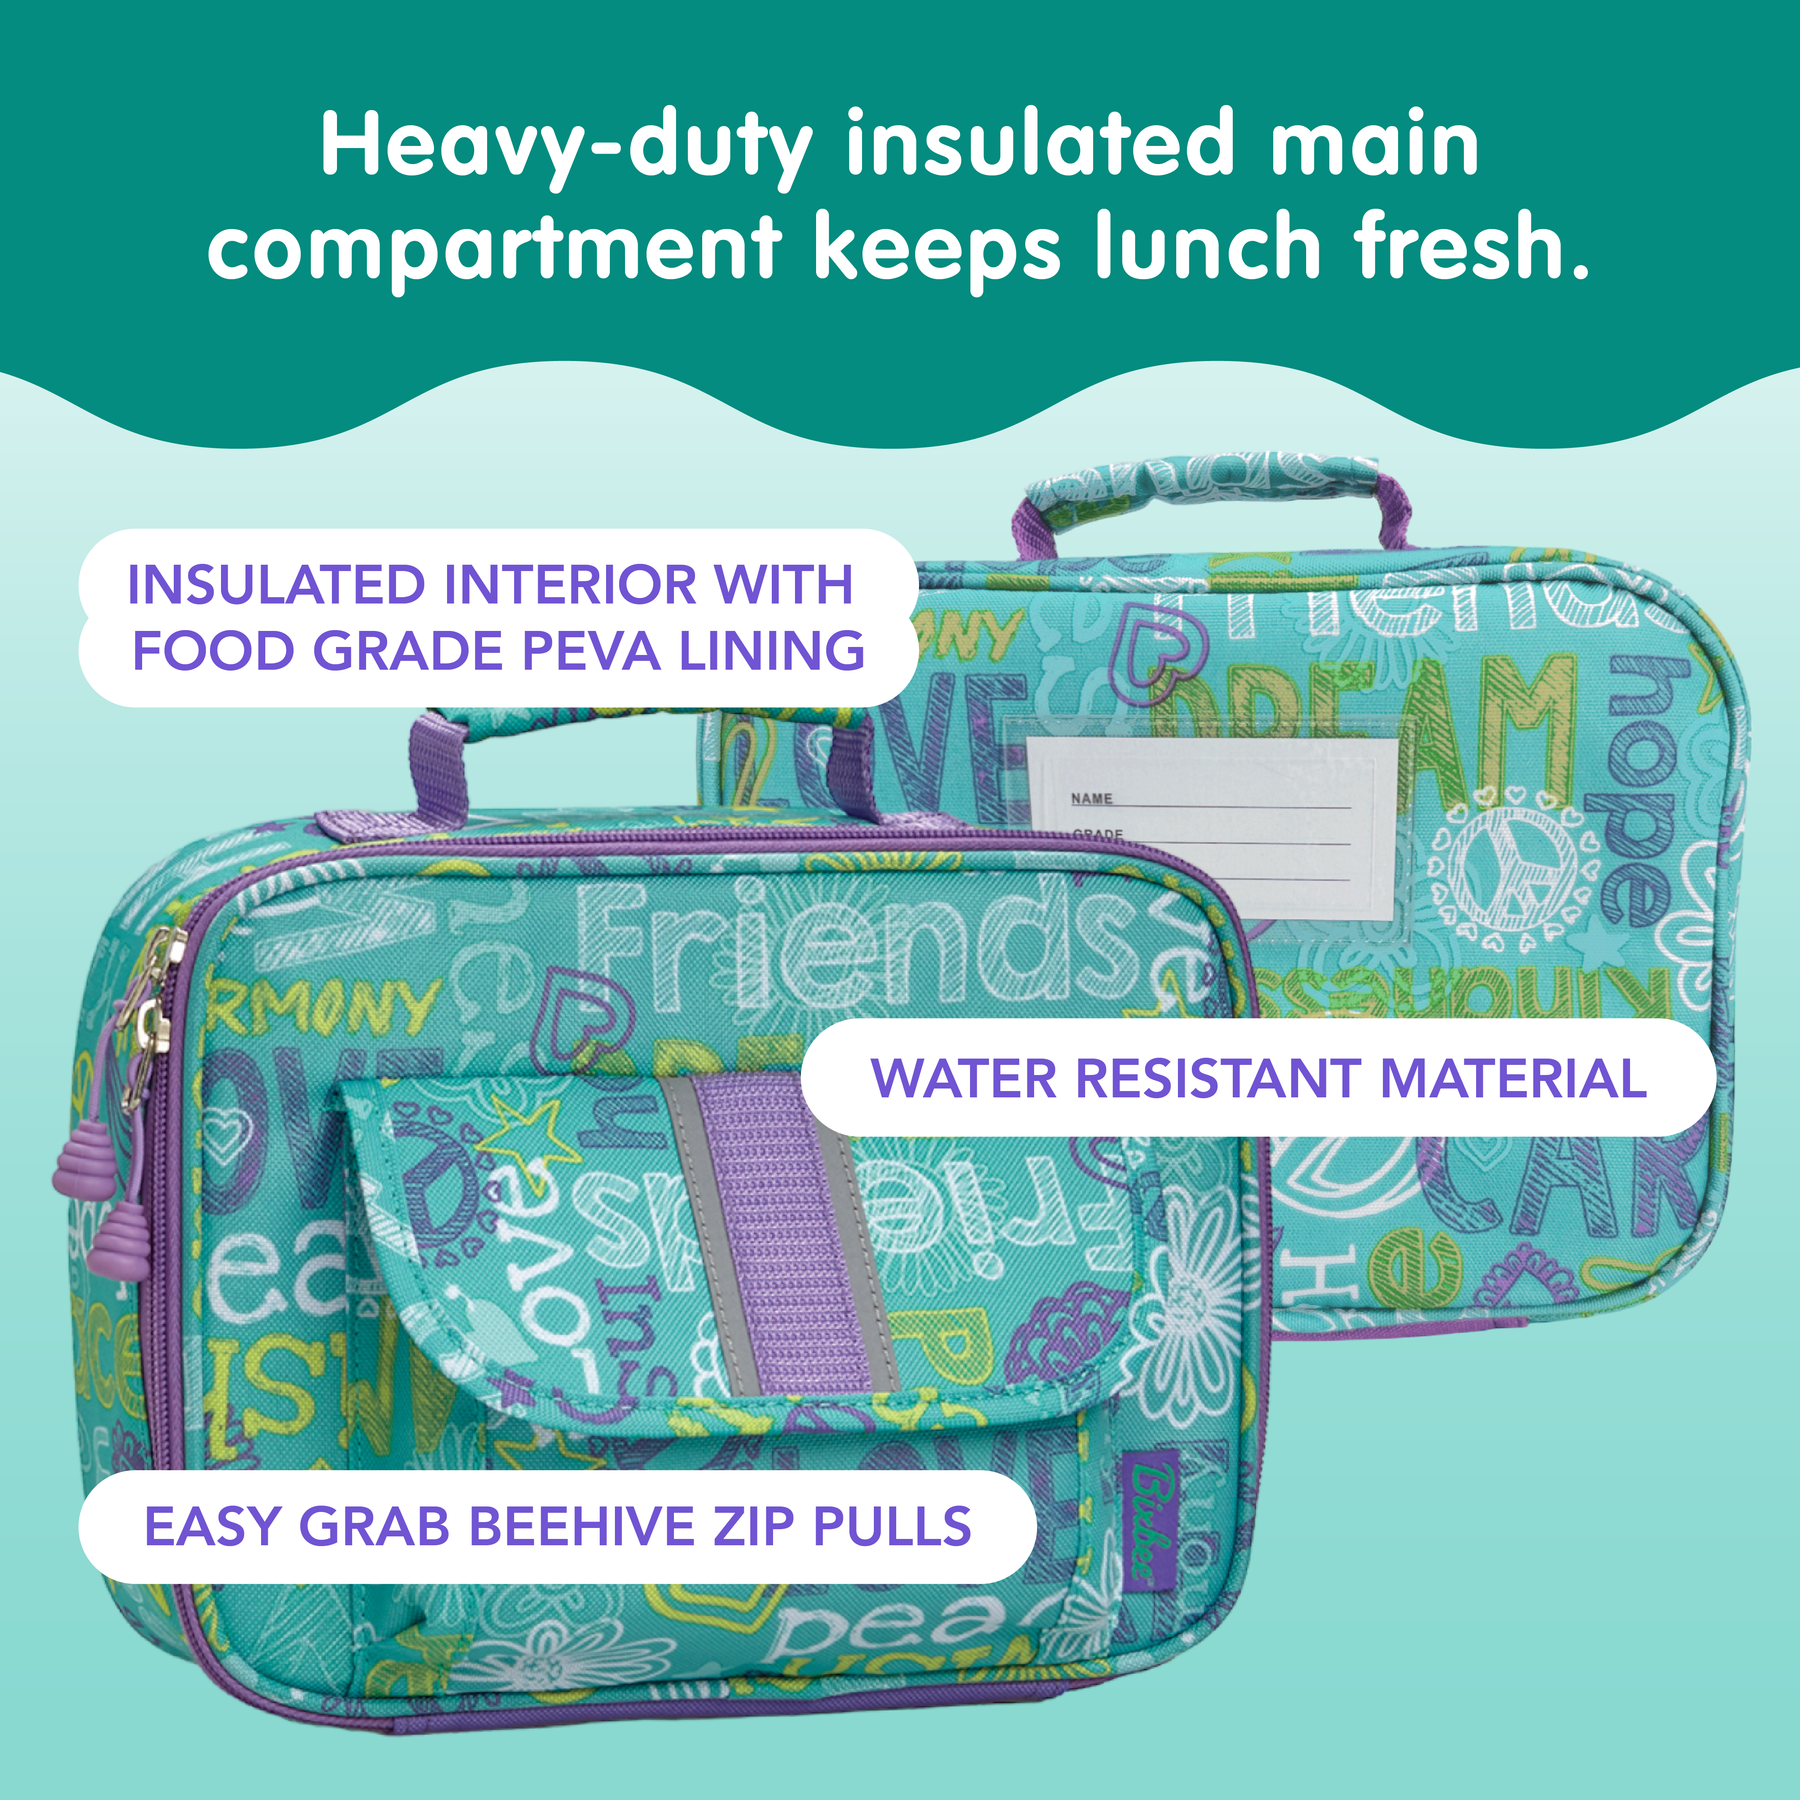 Bixbee Kitty Lunchbox - Kids Lunch Box, Insulated Lunch Bag For